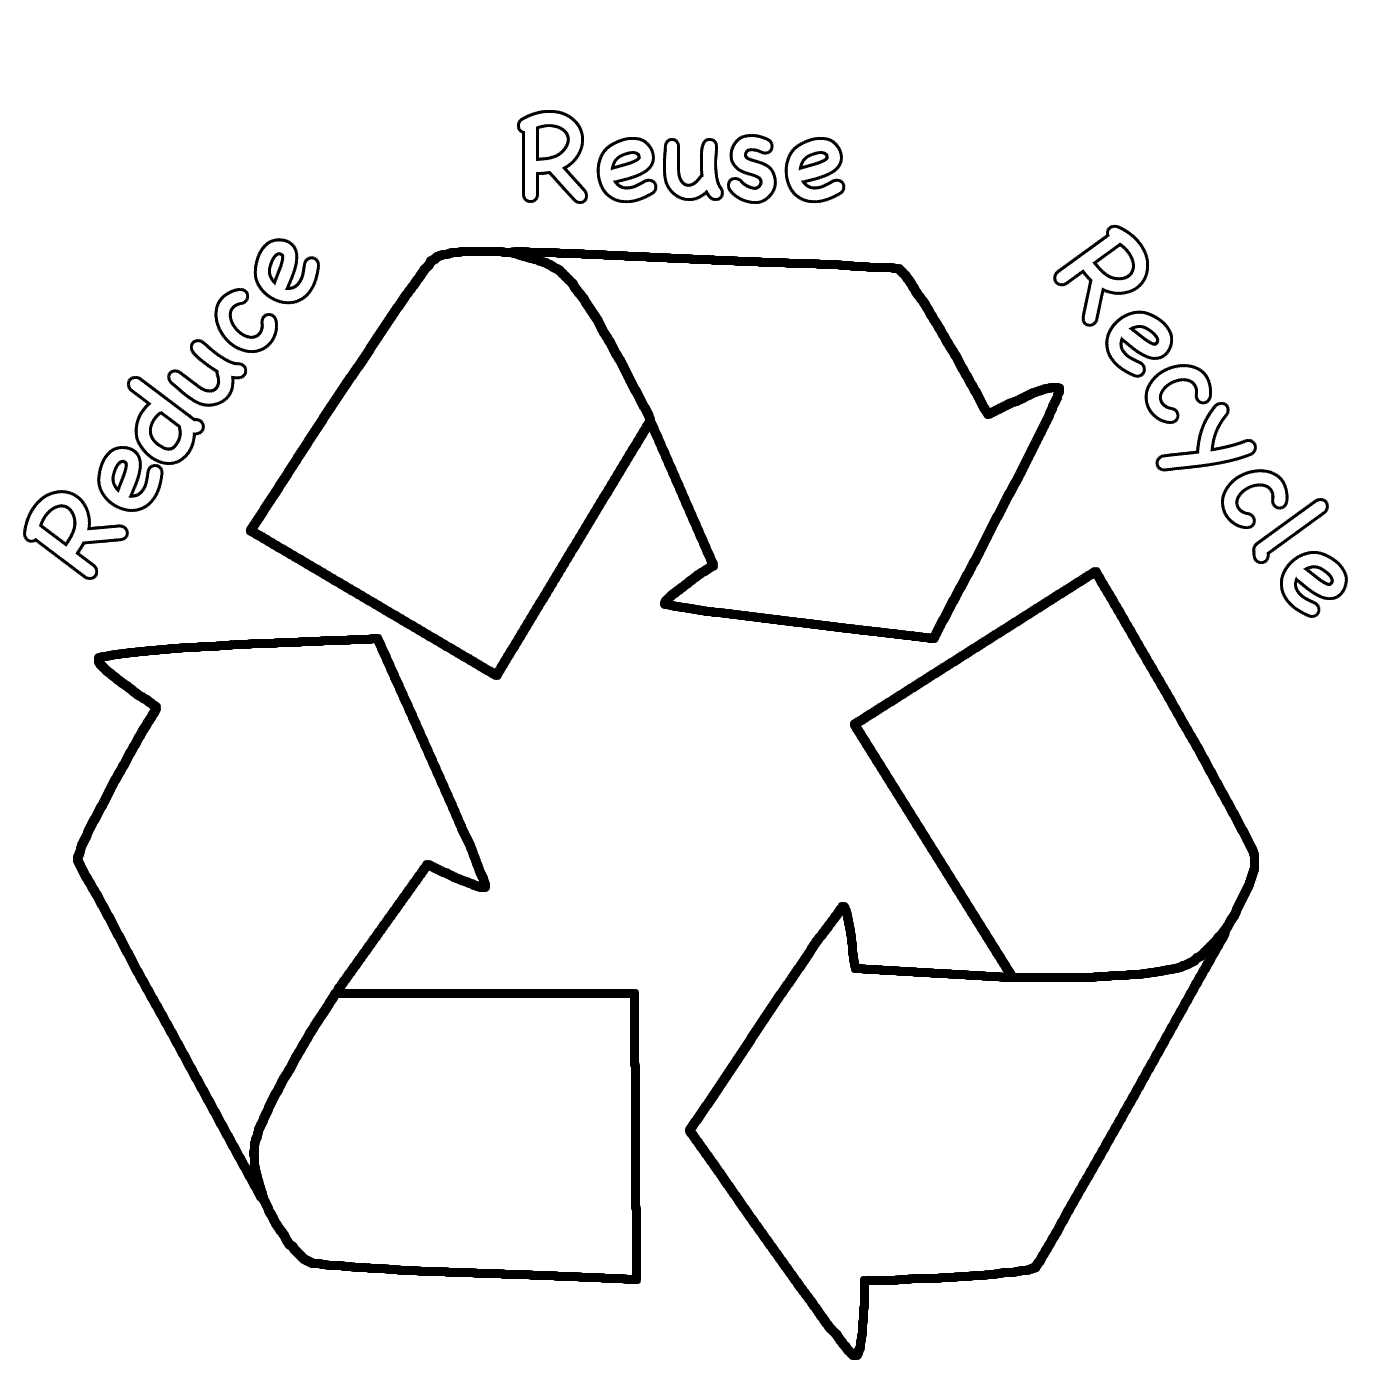 Free Recycle Coloring Pages, Download Free Recycle Coloring Pages png